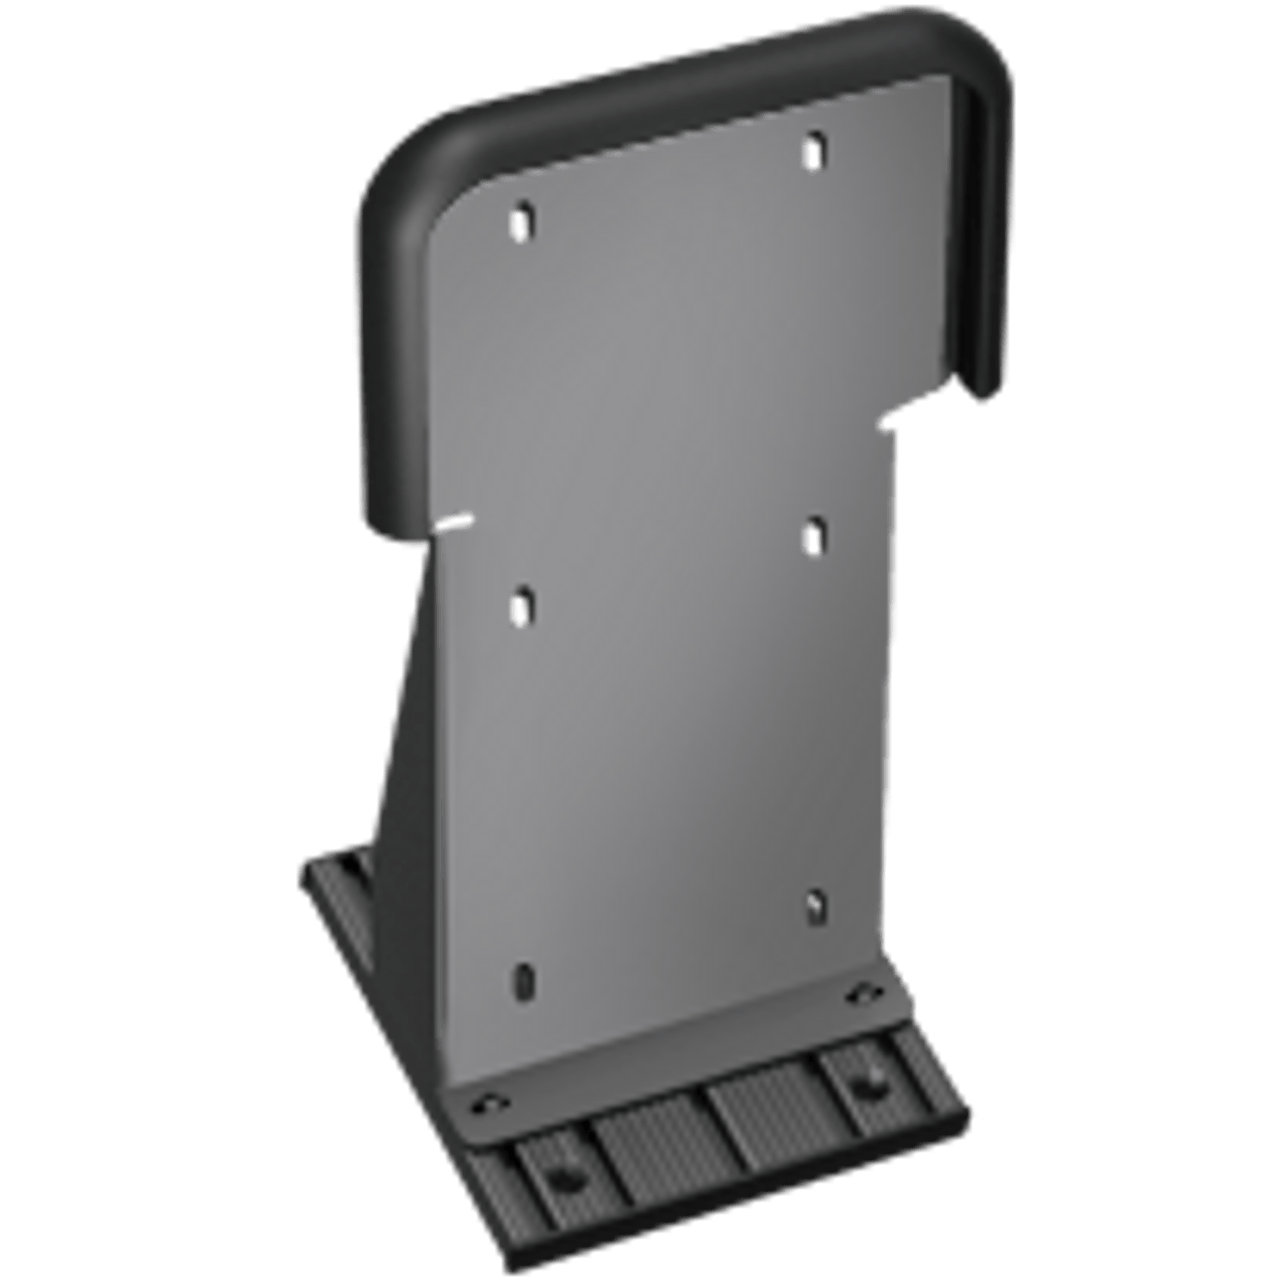 Setina T-Rail Free Standing Base, Weapon Mounting System (Mounting Base Only), For 2020-2023 Ford Interceptor Utility Admin Vehicle